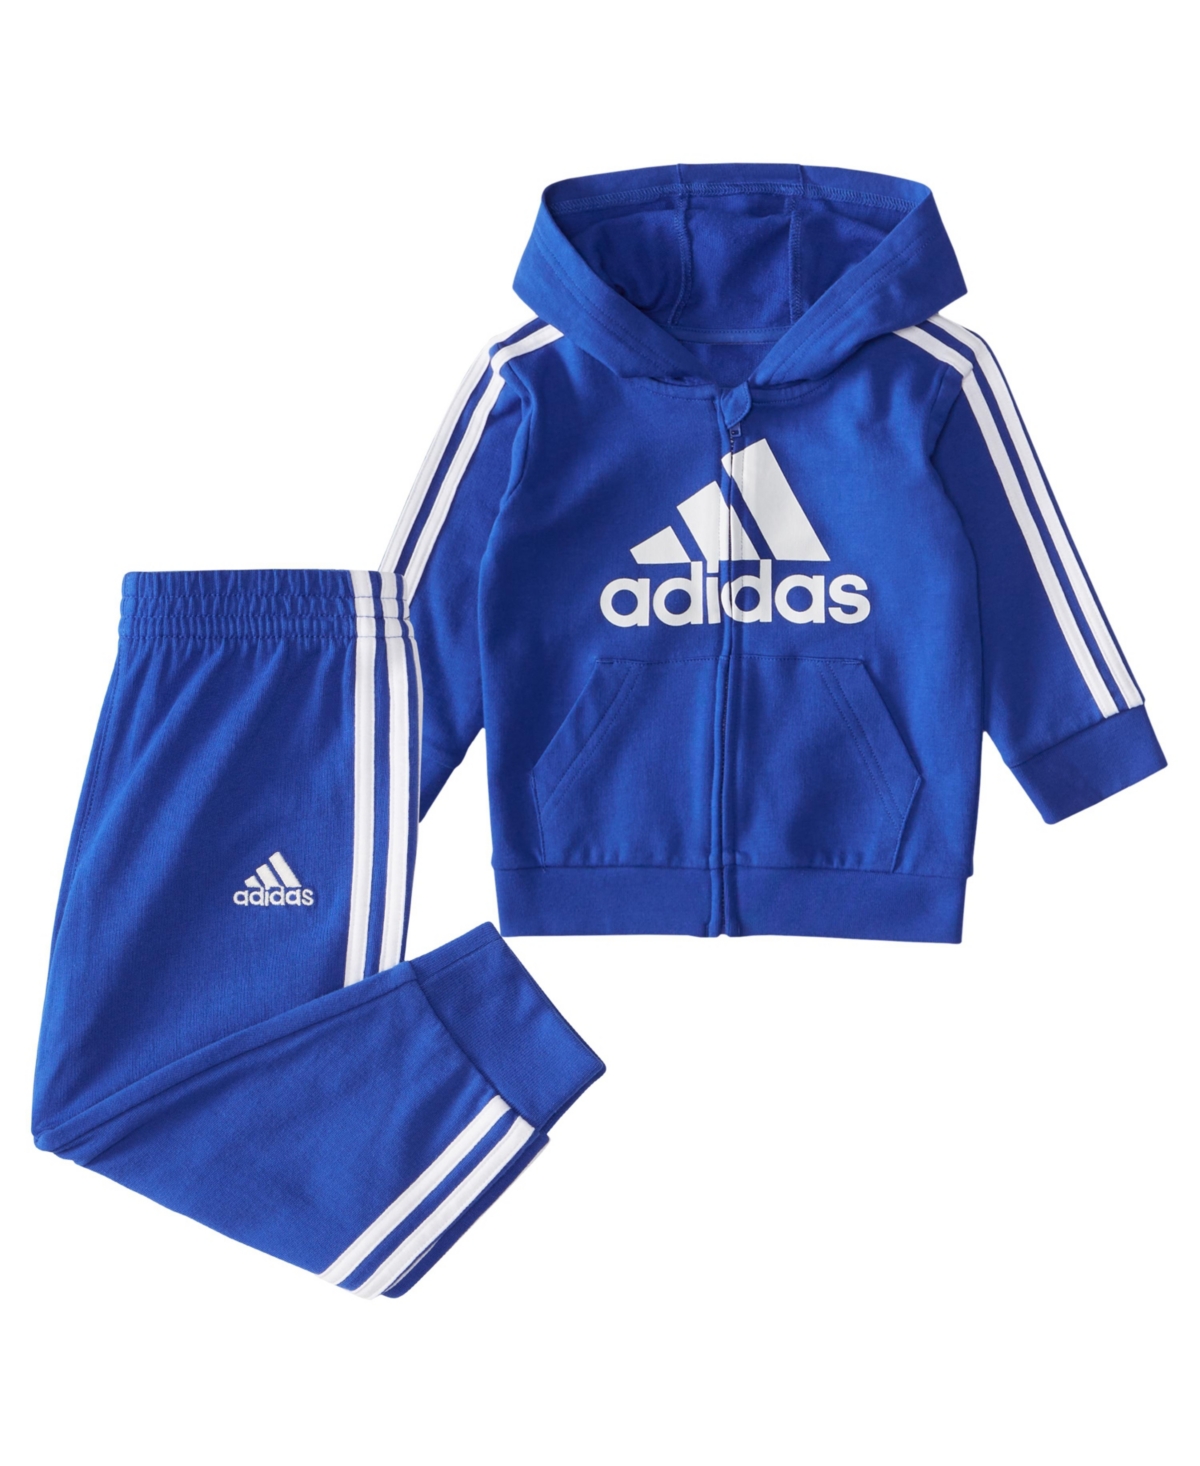 adidas Baby Boys Hooded French Terry Jacket 2 Piece Set